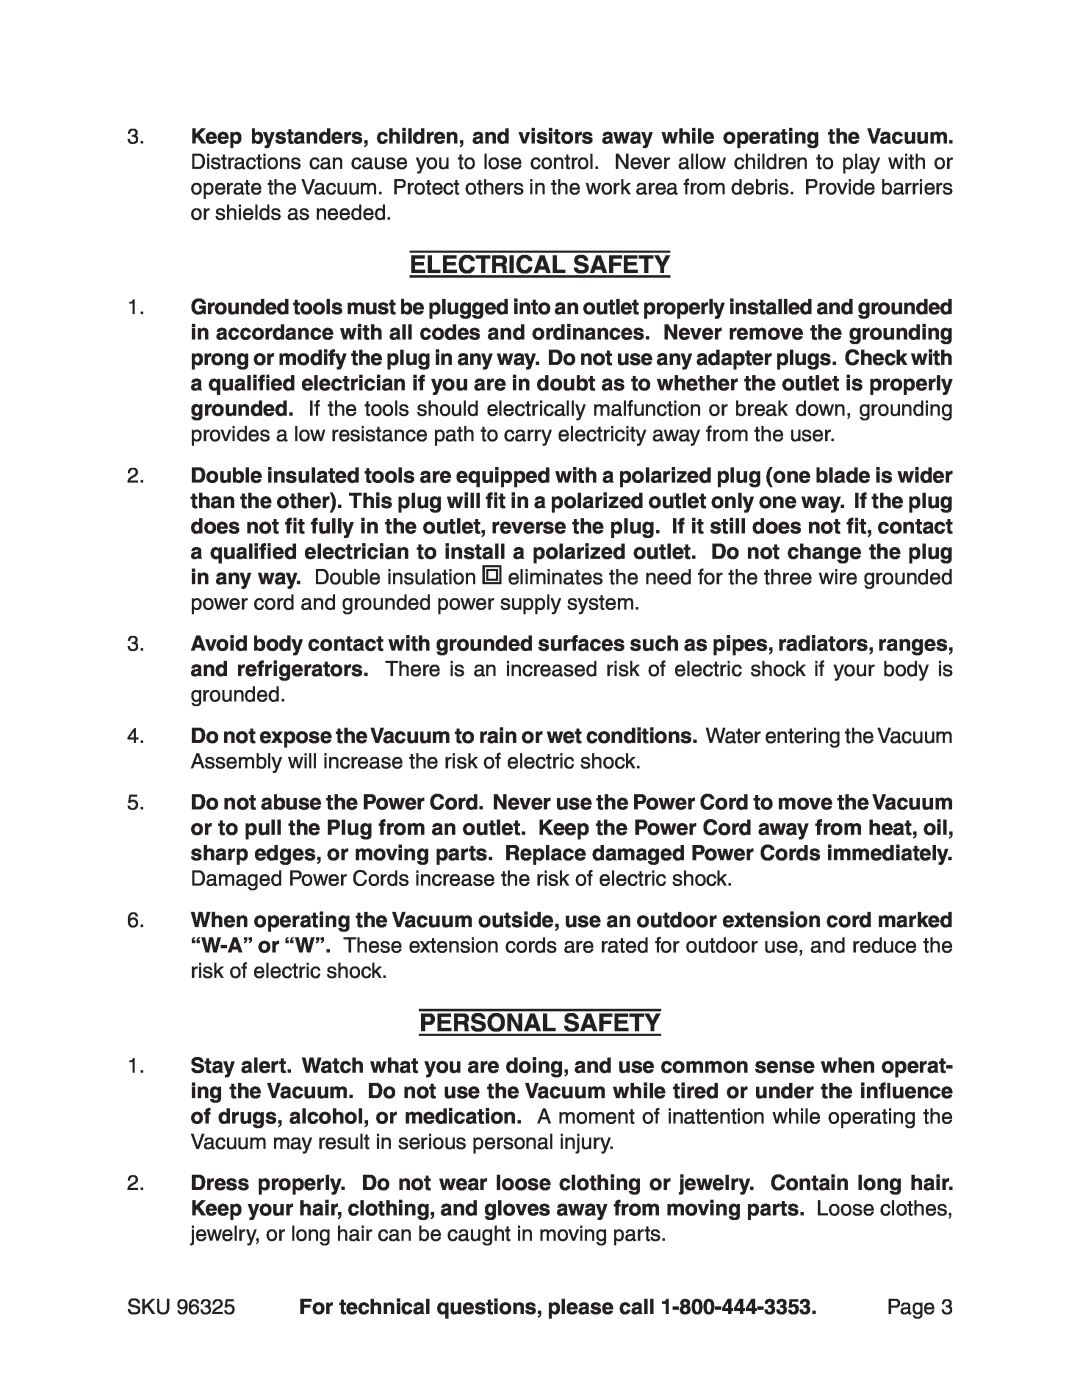 Harbor Freight Tools 96325 manual Electrical Safety, Personal Safety, For technical questions, please call 